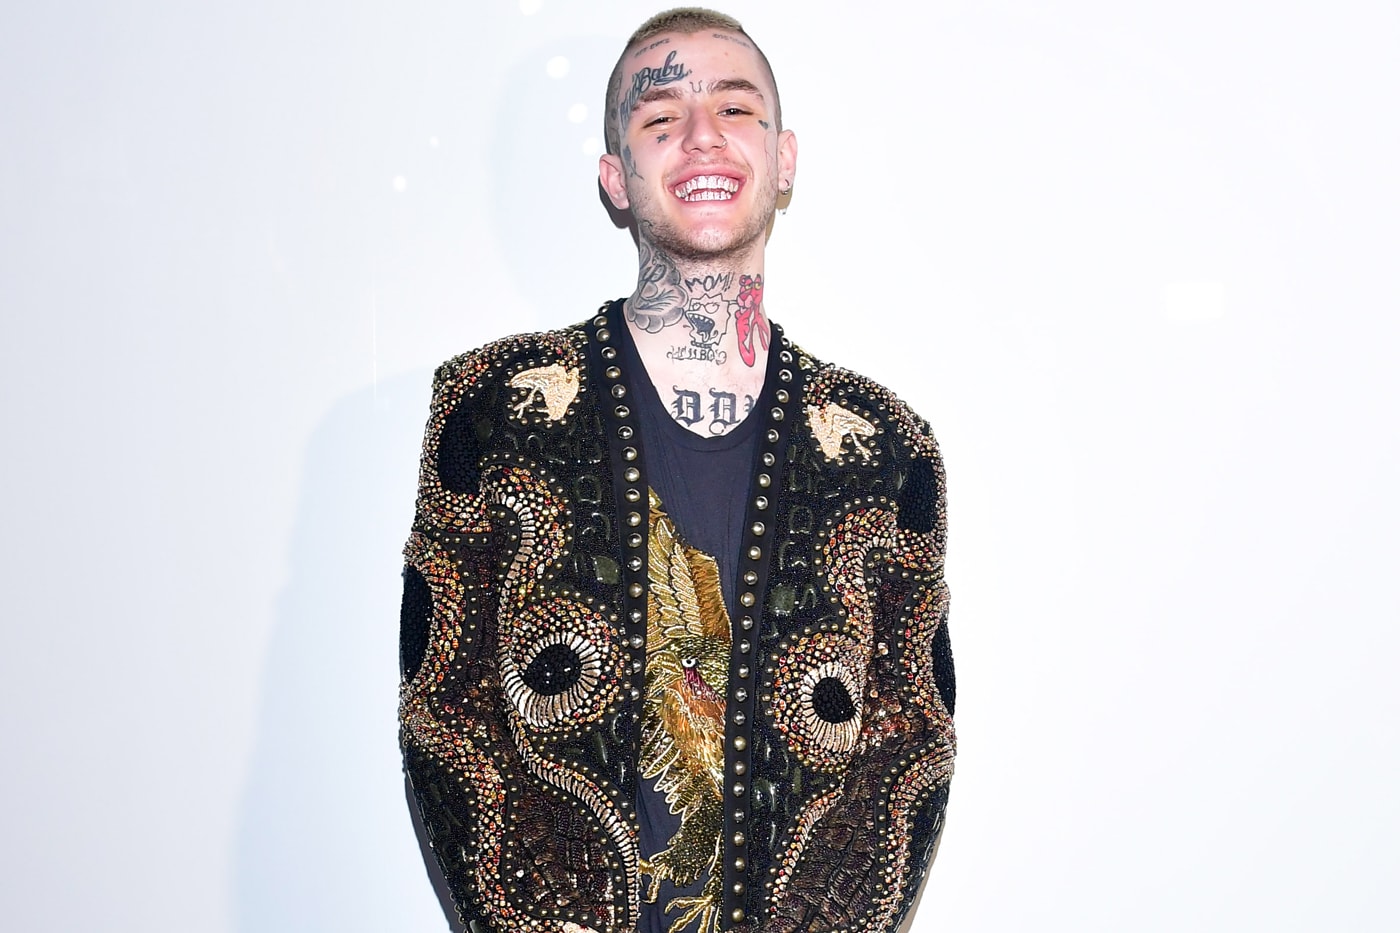 Producer Smokeasac Denies New Lil Peep Album Rumor Come Over When You're Sober Pt.3 2 Posthumous